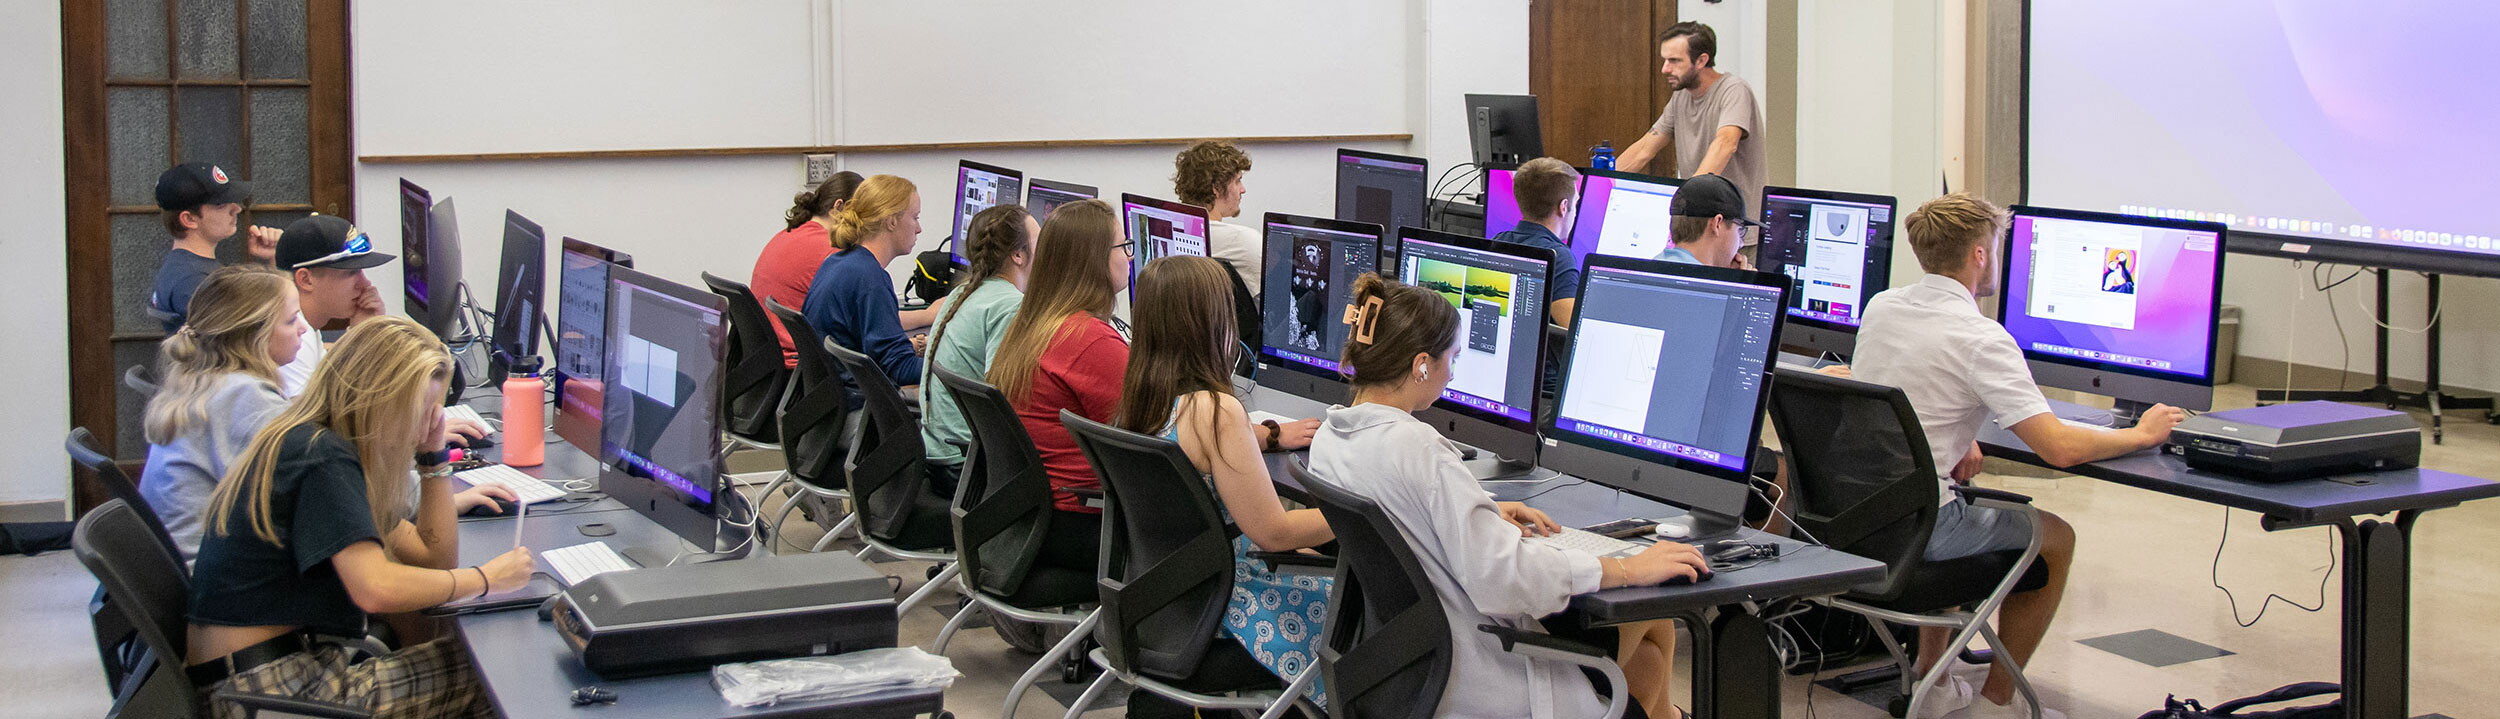 Classroom with three rows of desks with computers with big monitors. Students are seated at desks working with an instructor at the front of the class.